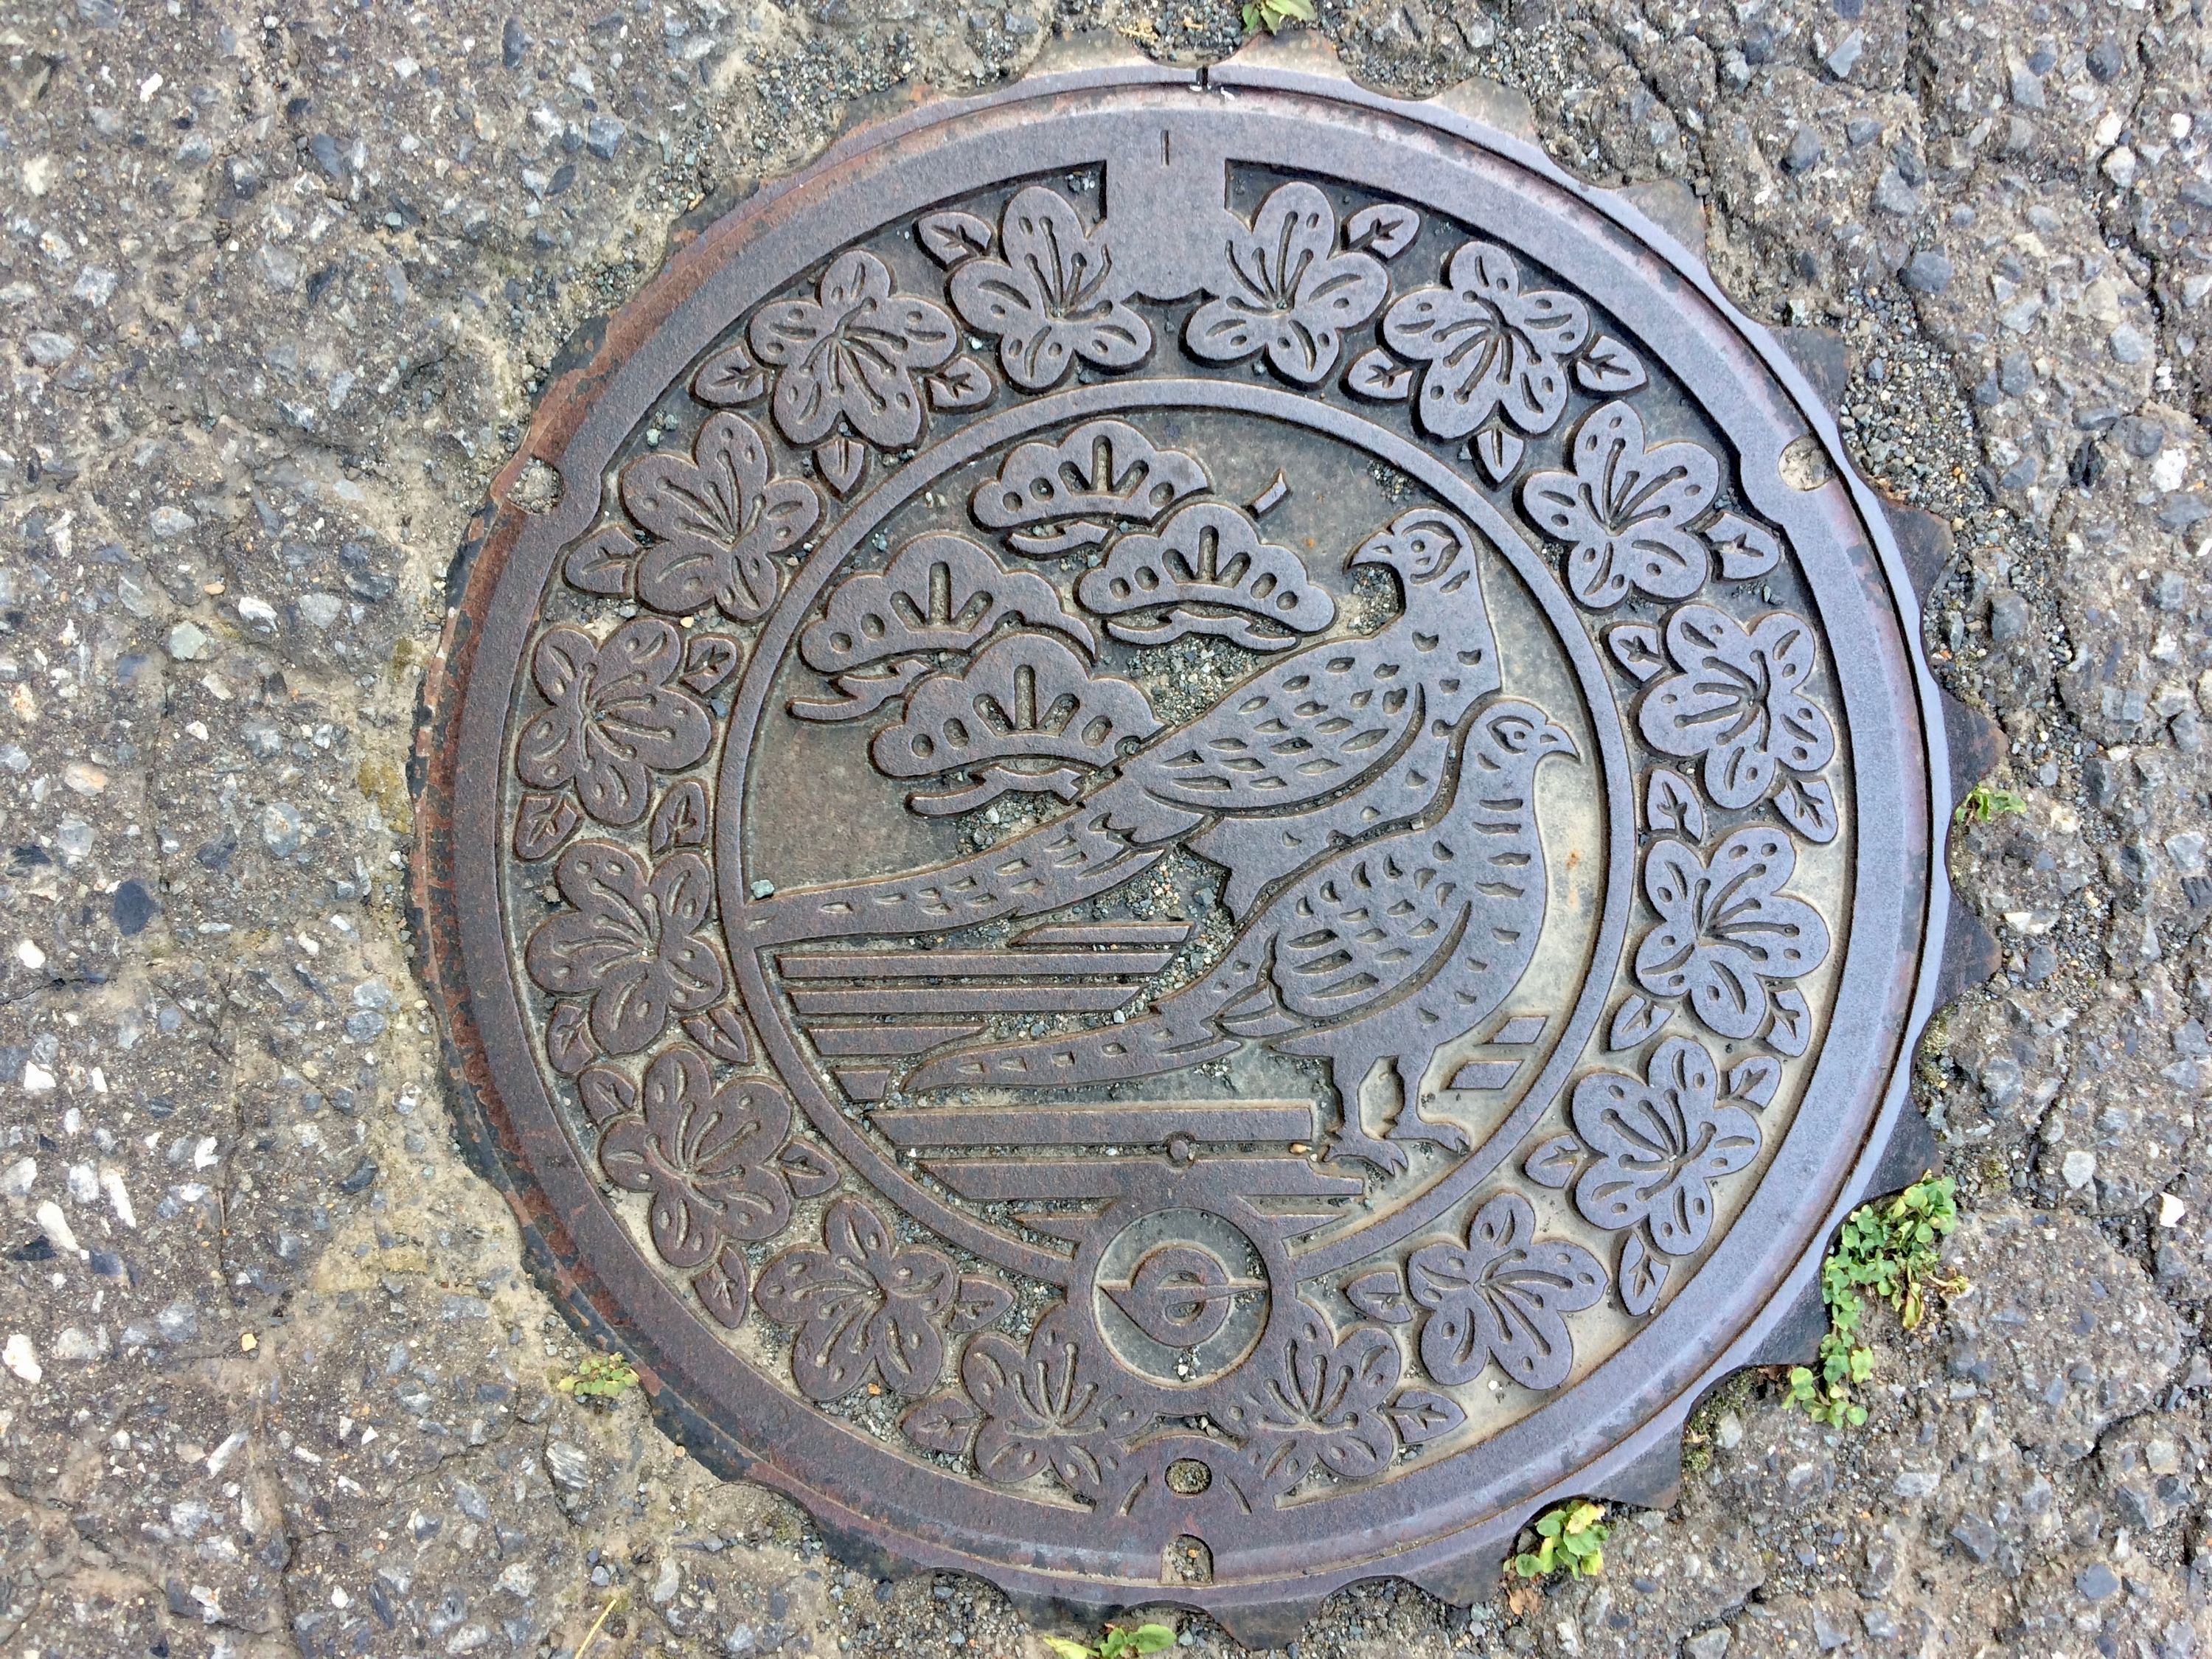 A manhole cover shows two very beautiful pheasants.